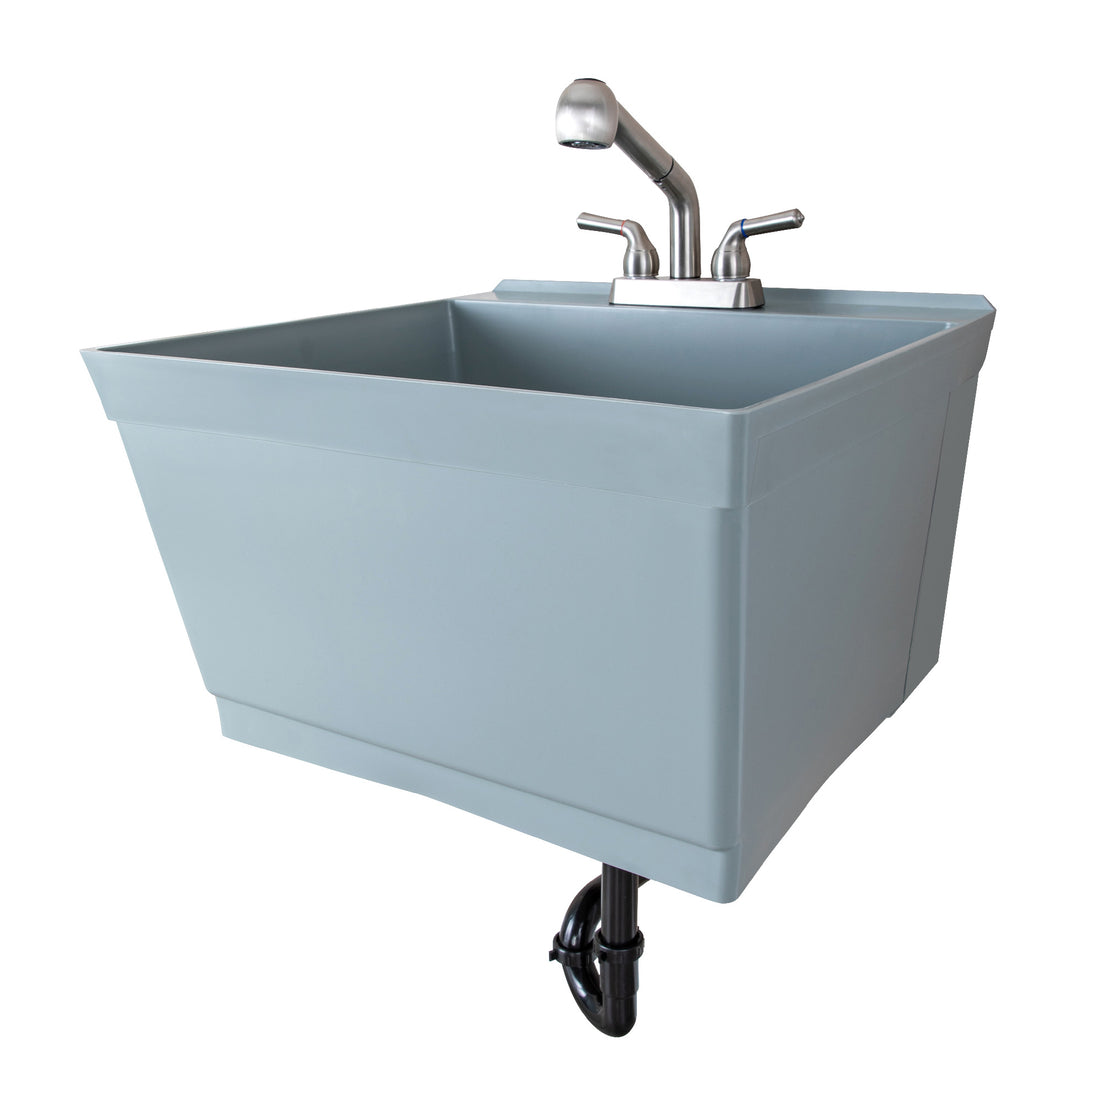 Tehila Standard Wall-Mounted Grey Utility Sink with Stainless Steel Finish Pull-Out Faucet - Utility sinks vanites Tehila